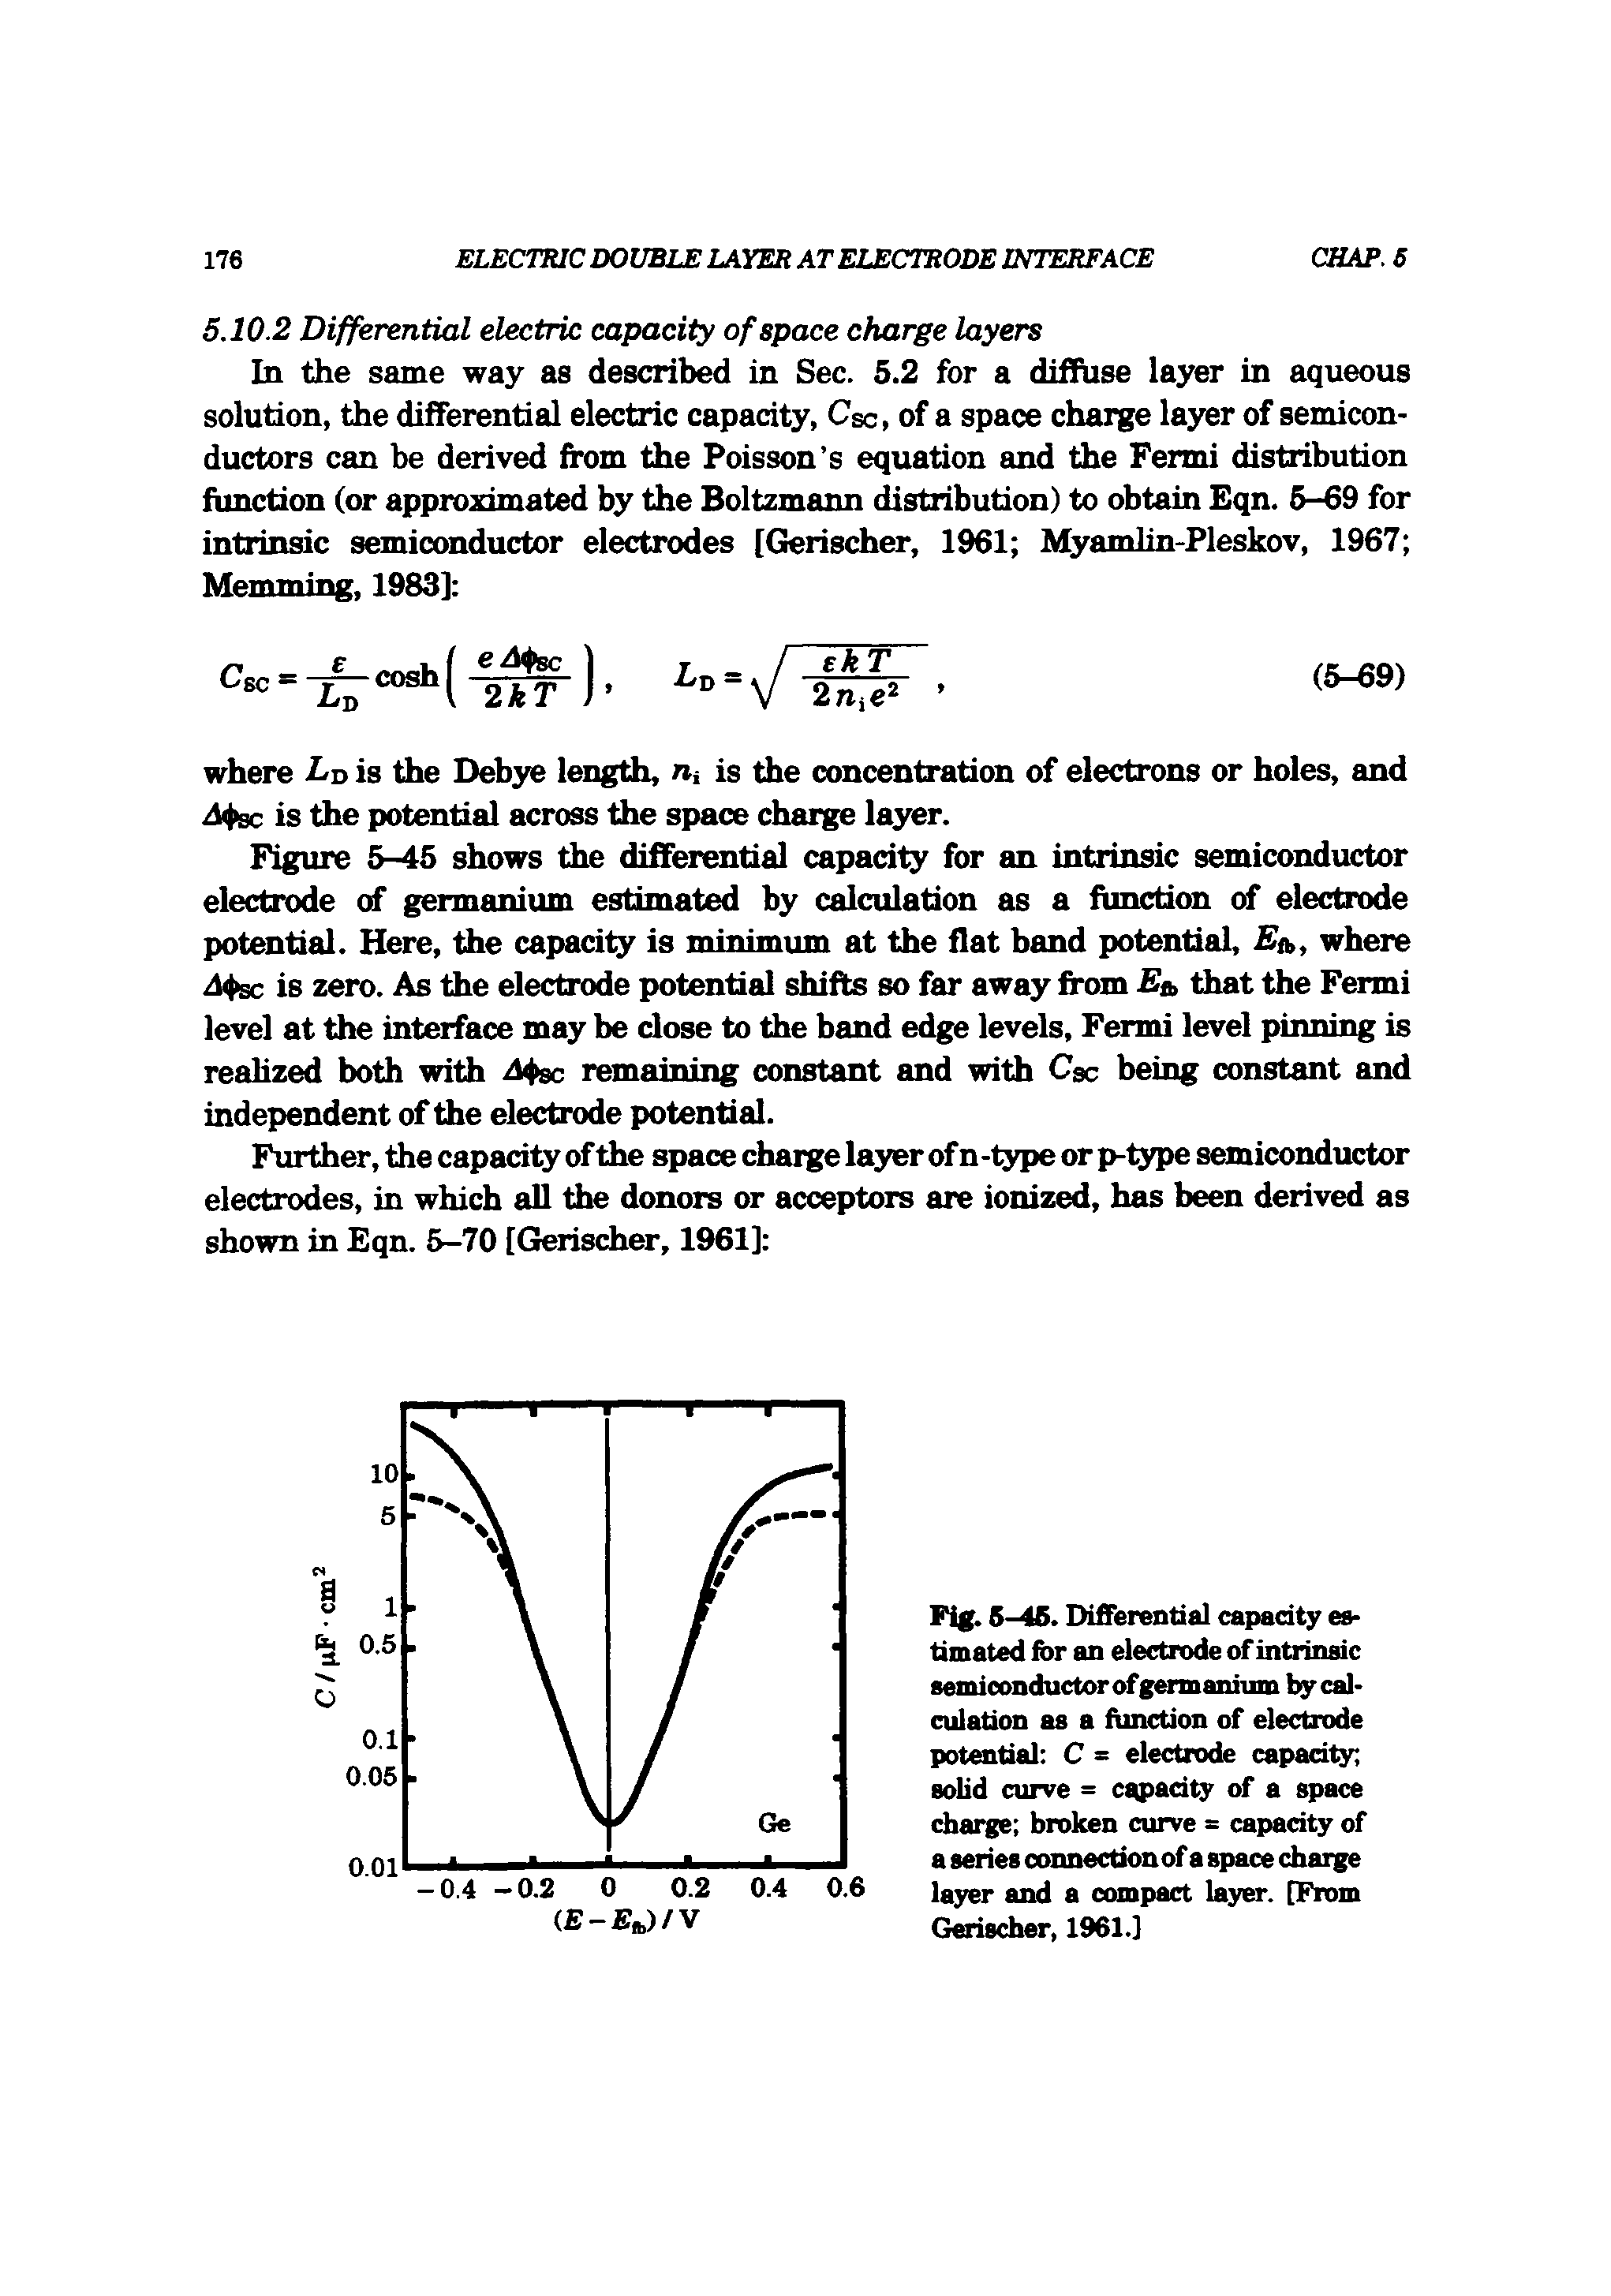 Fig. 5-46. Differential capacity estimated for an electrode of intrinsic semiconductor of germanium by calculation as a function of electrode potential C = electrode capacity solid curve = capacity of a space charge broken curve = capacity of a series connection of a space charge layer and a compact layer. [From Goischer, 1961.)...